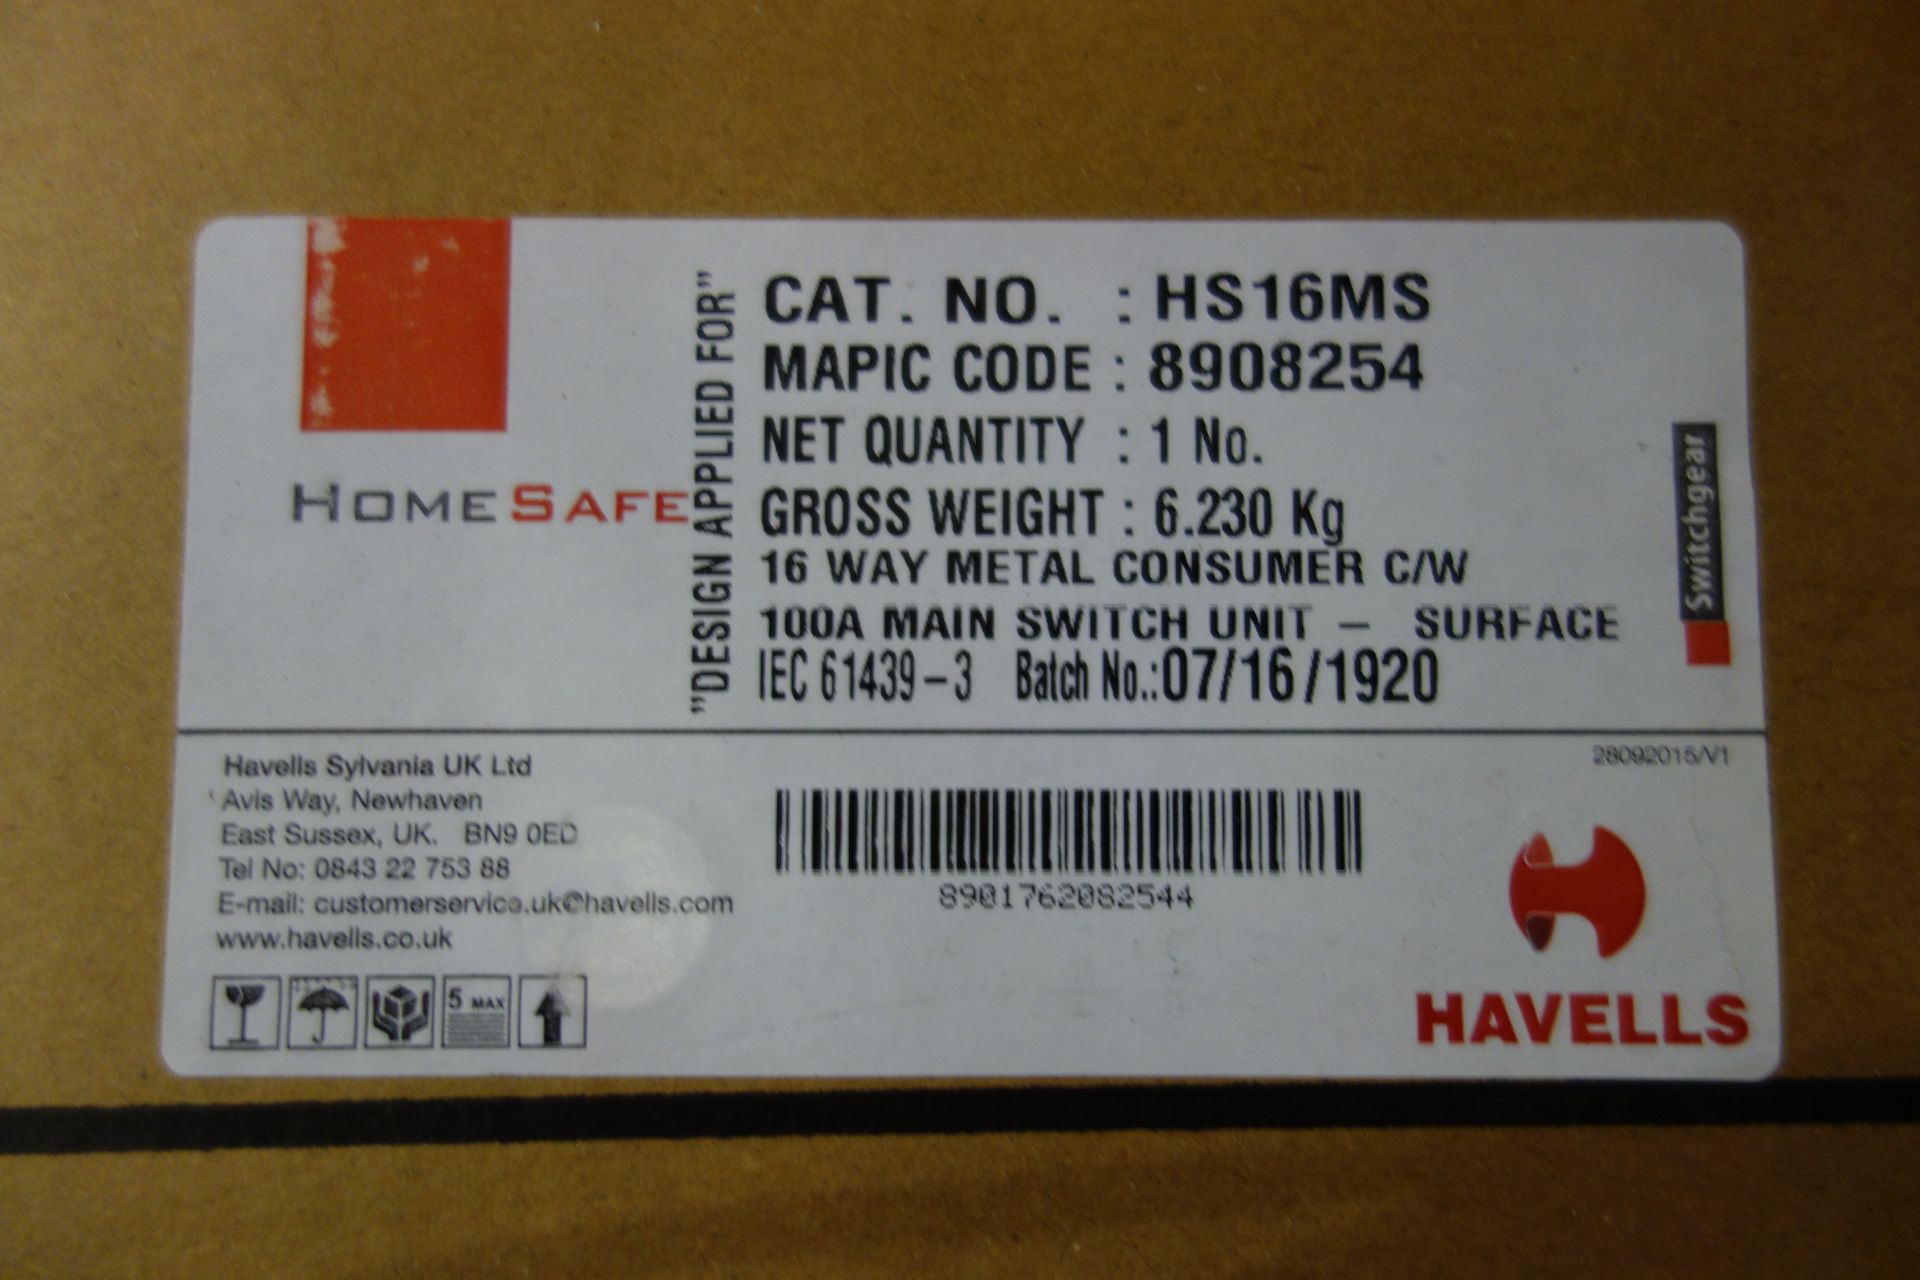 3 X Havells HS16MS 16W Metal Consumer C/W 100A Main Switch Unit - Image 2 of 2